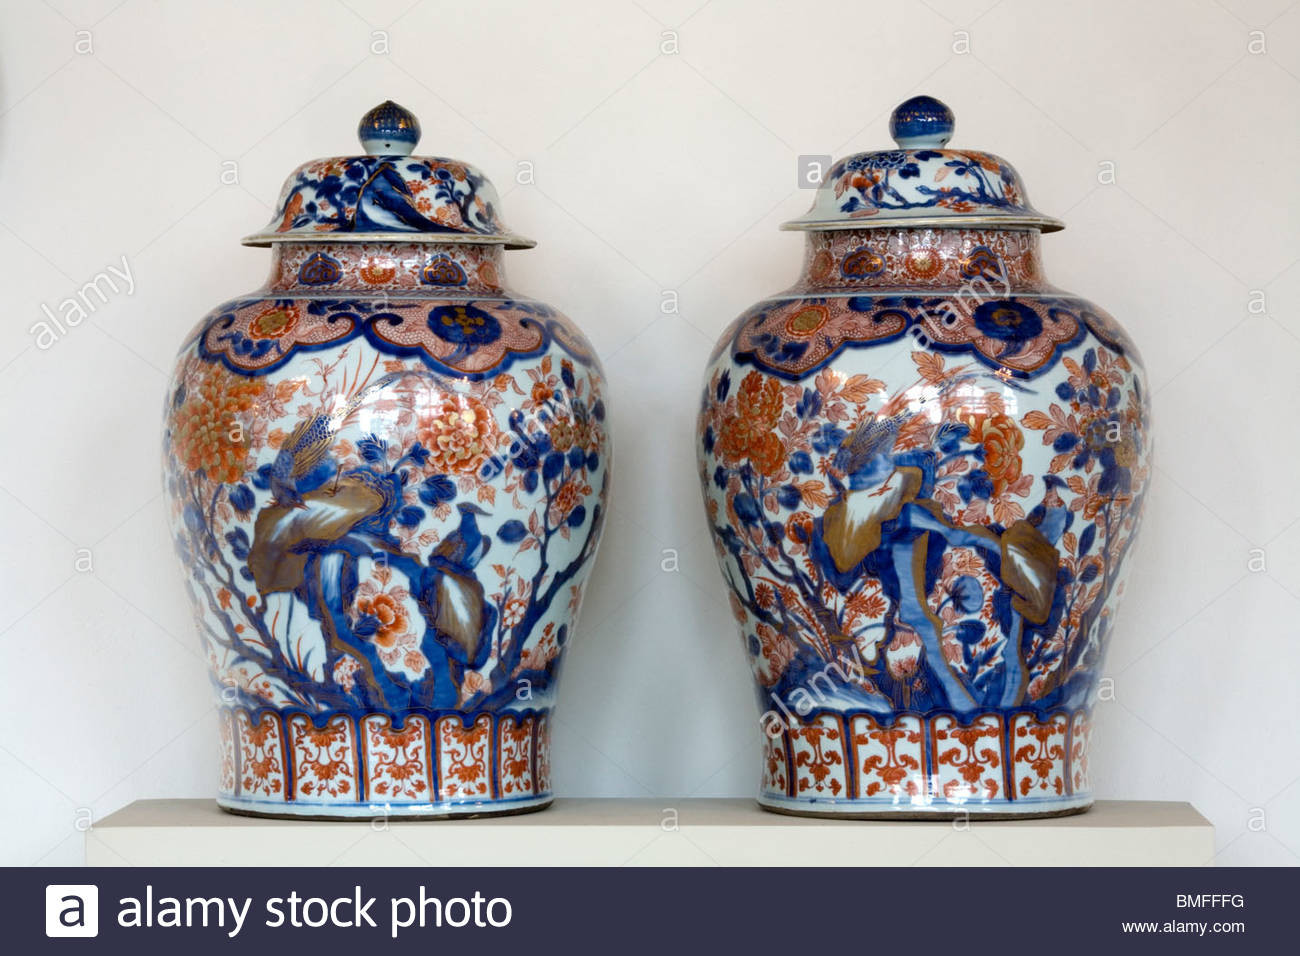 20 Fabulous Chinese Porcelain Vases for Sale 2022 free download chinese porcelain vases for sale of imari porcelain stock photos imari porcelain stock images alamy with chinese imari porcelain vases of the kangxi period 1662 1722 porcelain museum in